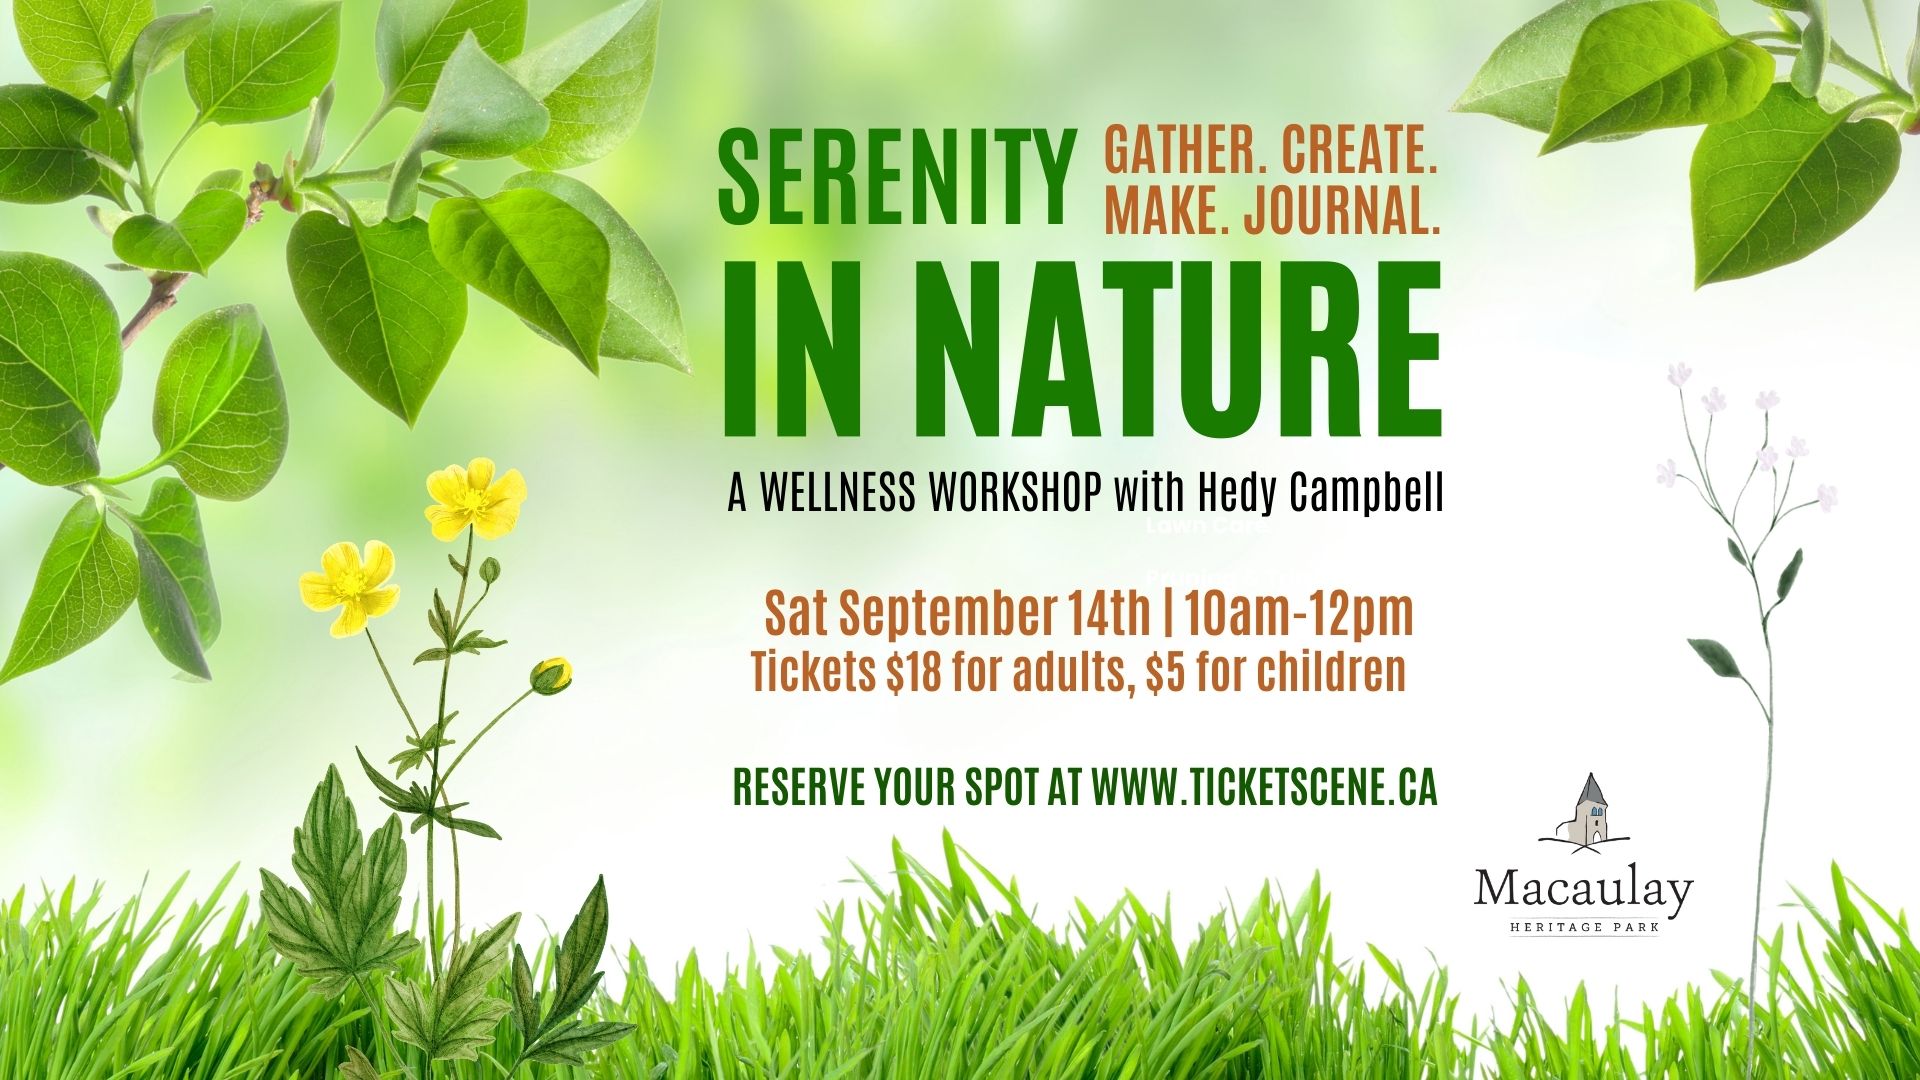 Serenity in Nature: A Wellness Workshop with Hedy Campbell